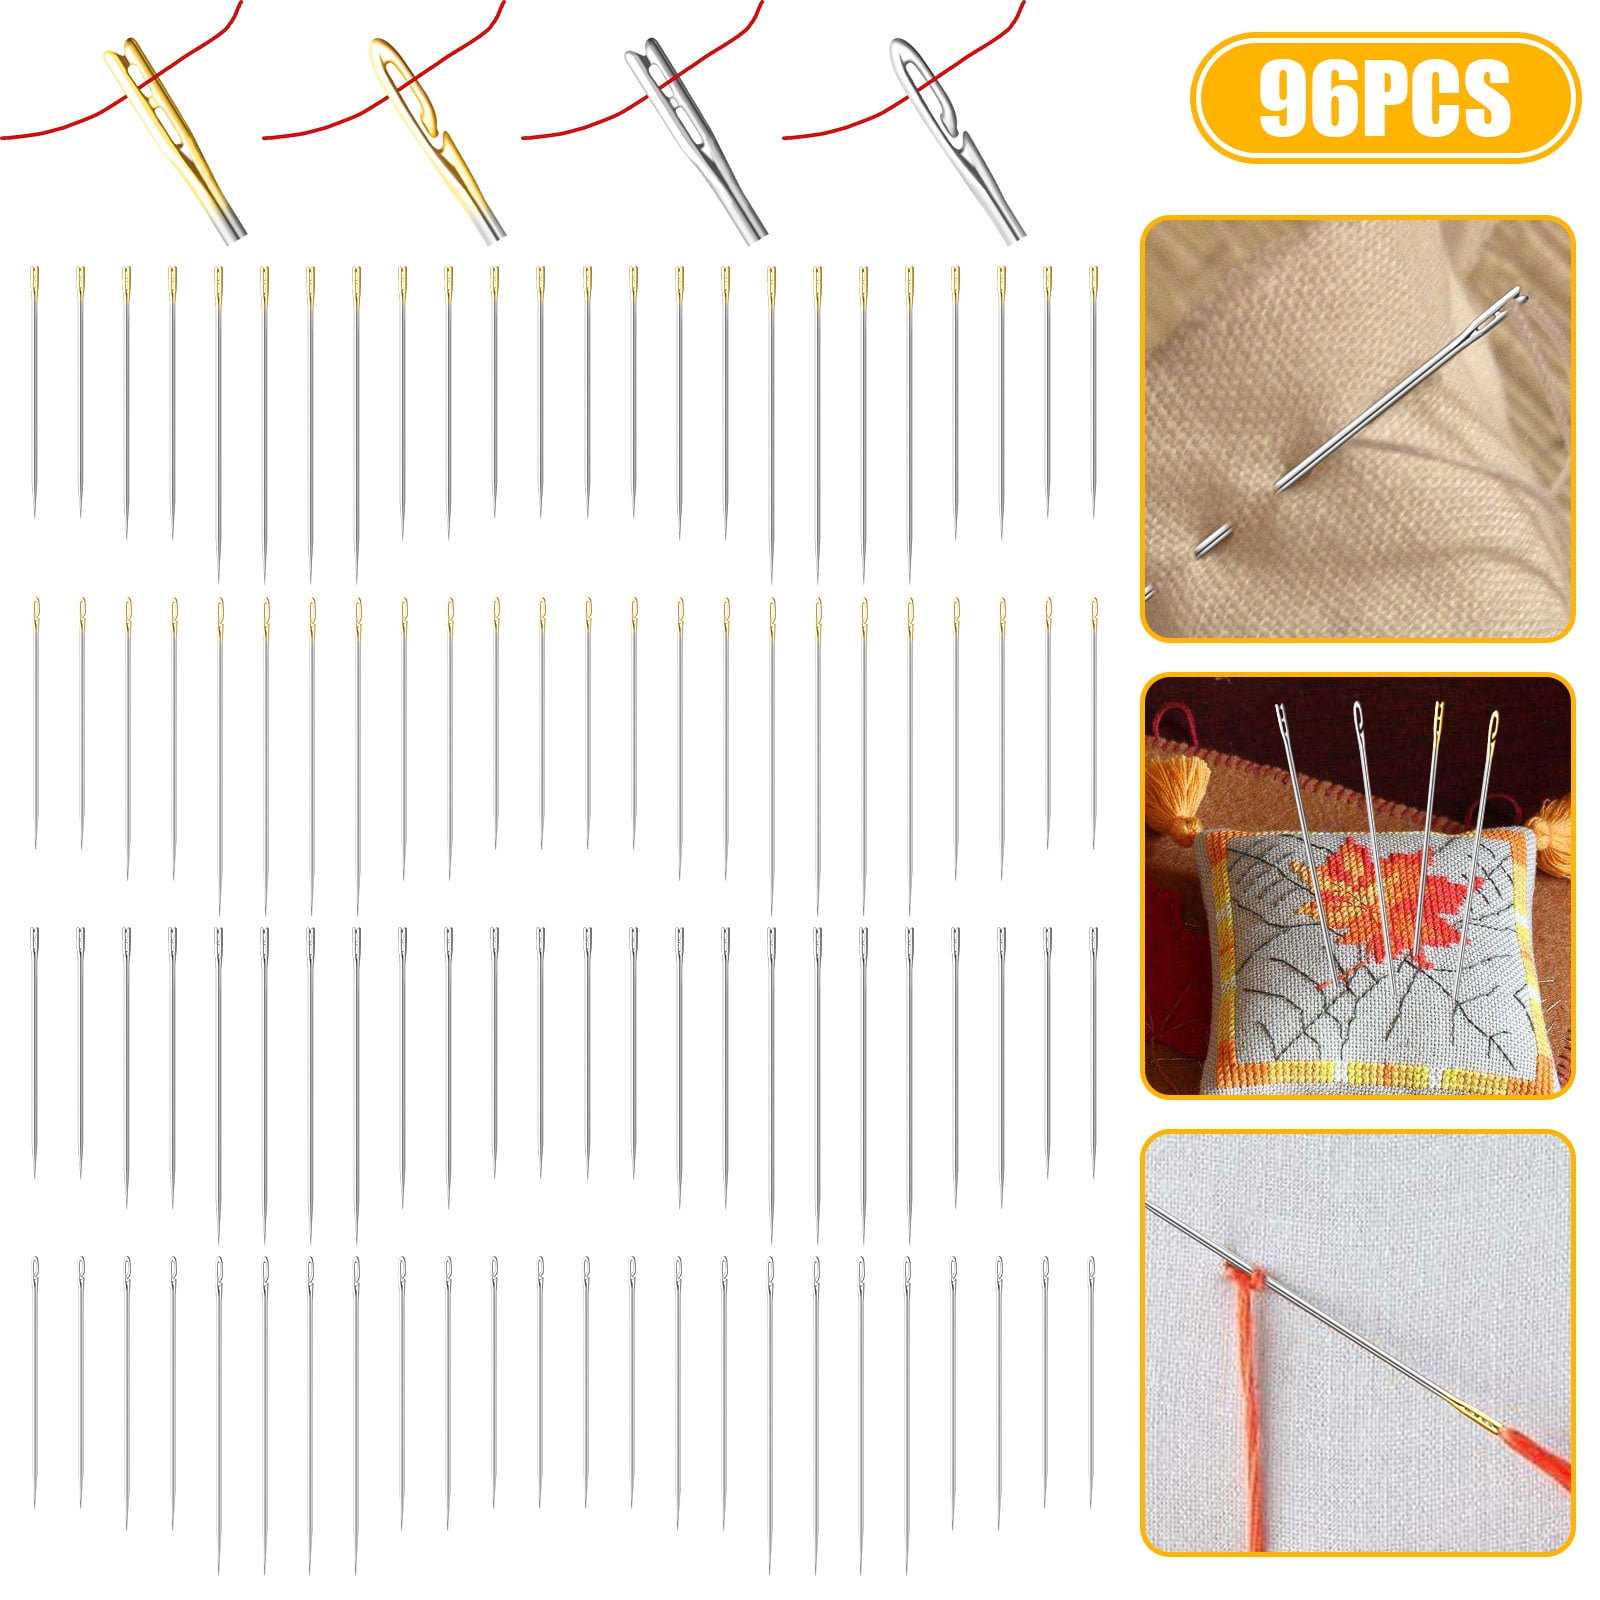 12 Pcs Sewing Needles with Storage Box, Self Threading Needles for